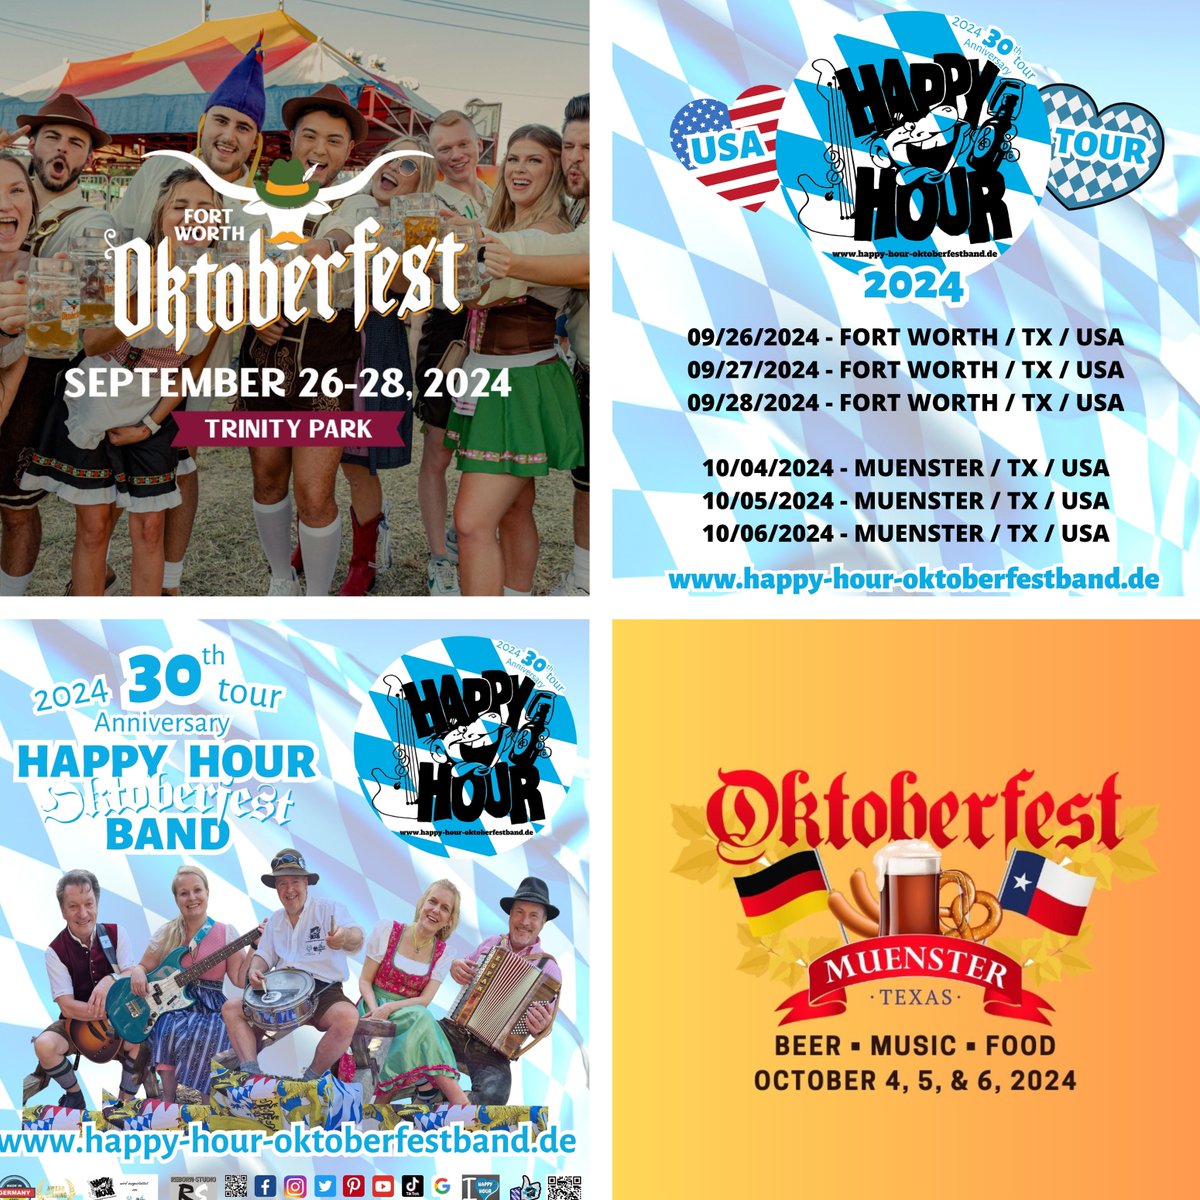 SAVE the dates....WE can't wait to celebrate OKTOBERFEST with Y'ALL! HAPPY HOUR OKTOBERFESTBAND happy-hour-oktoberfestband.de 2024 OKTOBERFEST FORT WORTH / TEXAS / USA fortworthoktoberfest.com 26.-28.09.24 2024 OKTOBERFEST MUENSTER / TEXAS / USA muensterchamber.com 04.-06.10.24